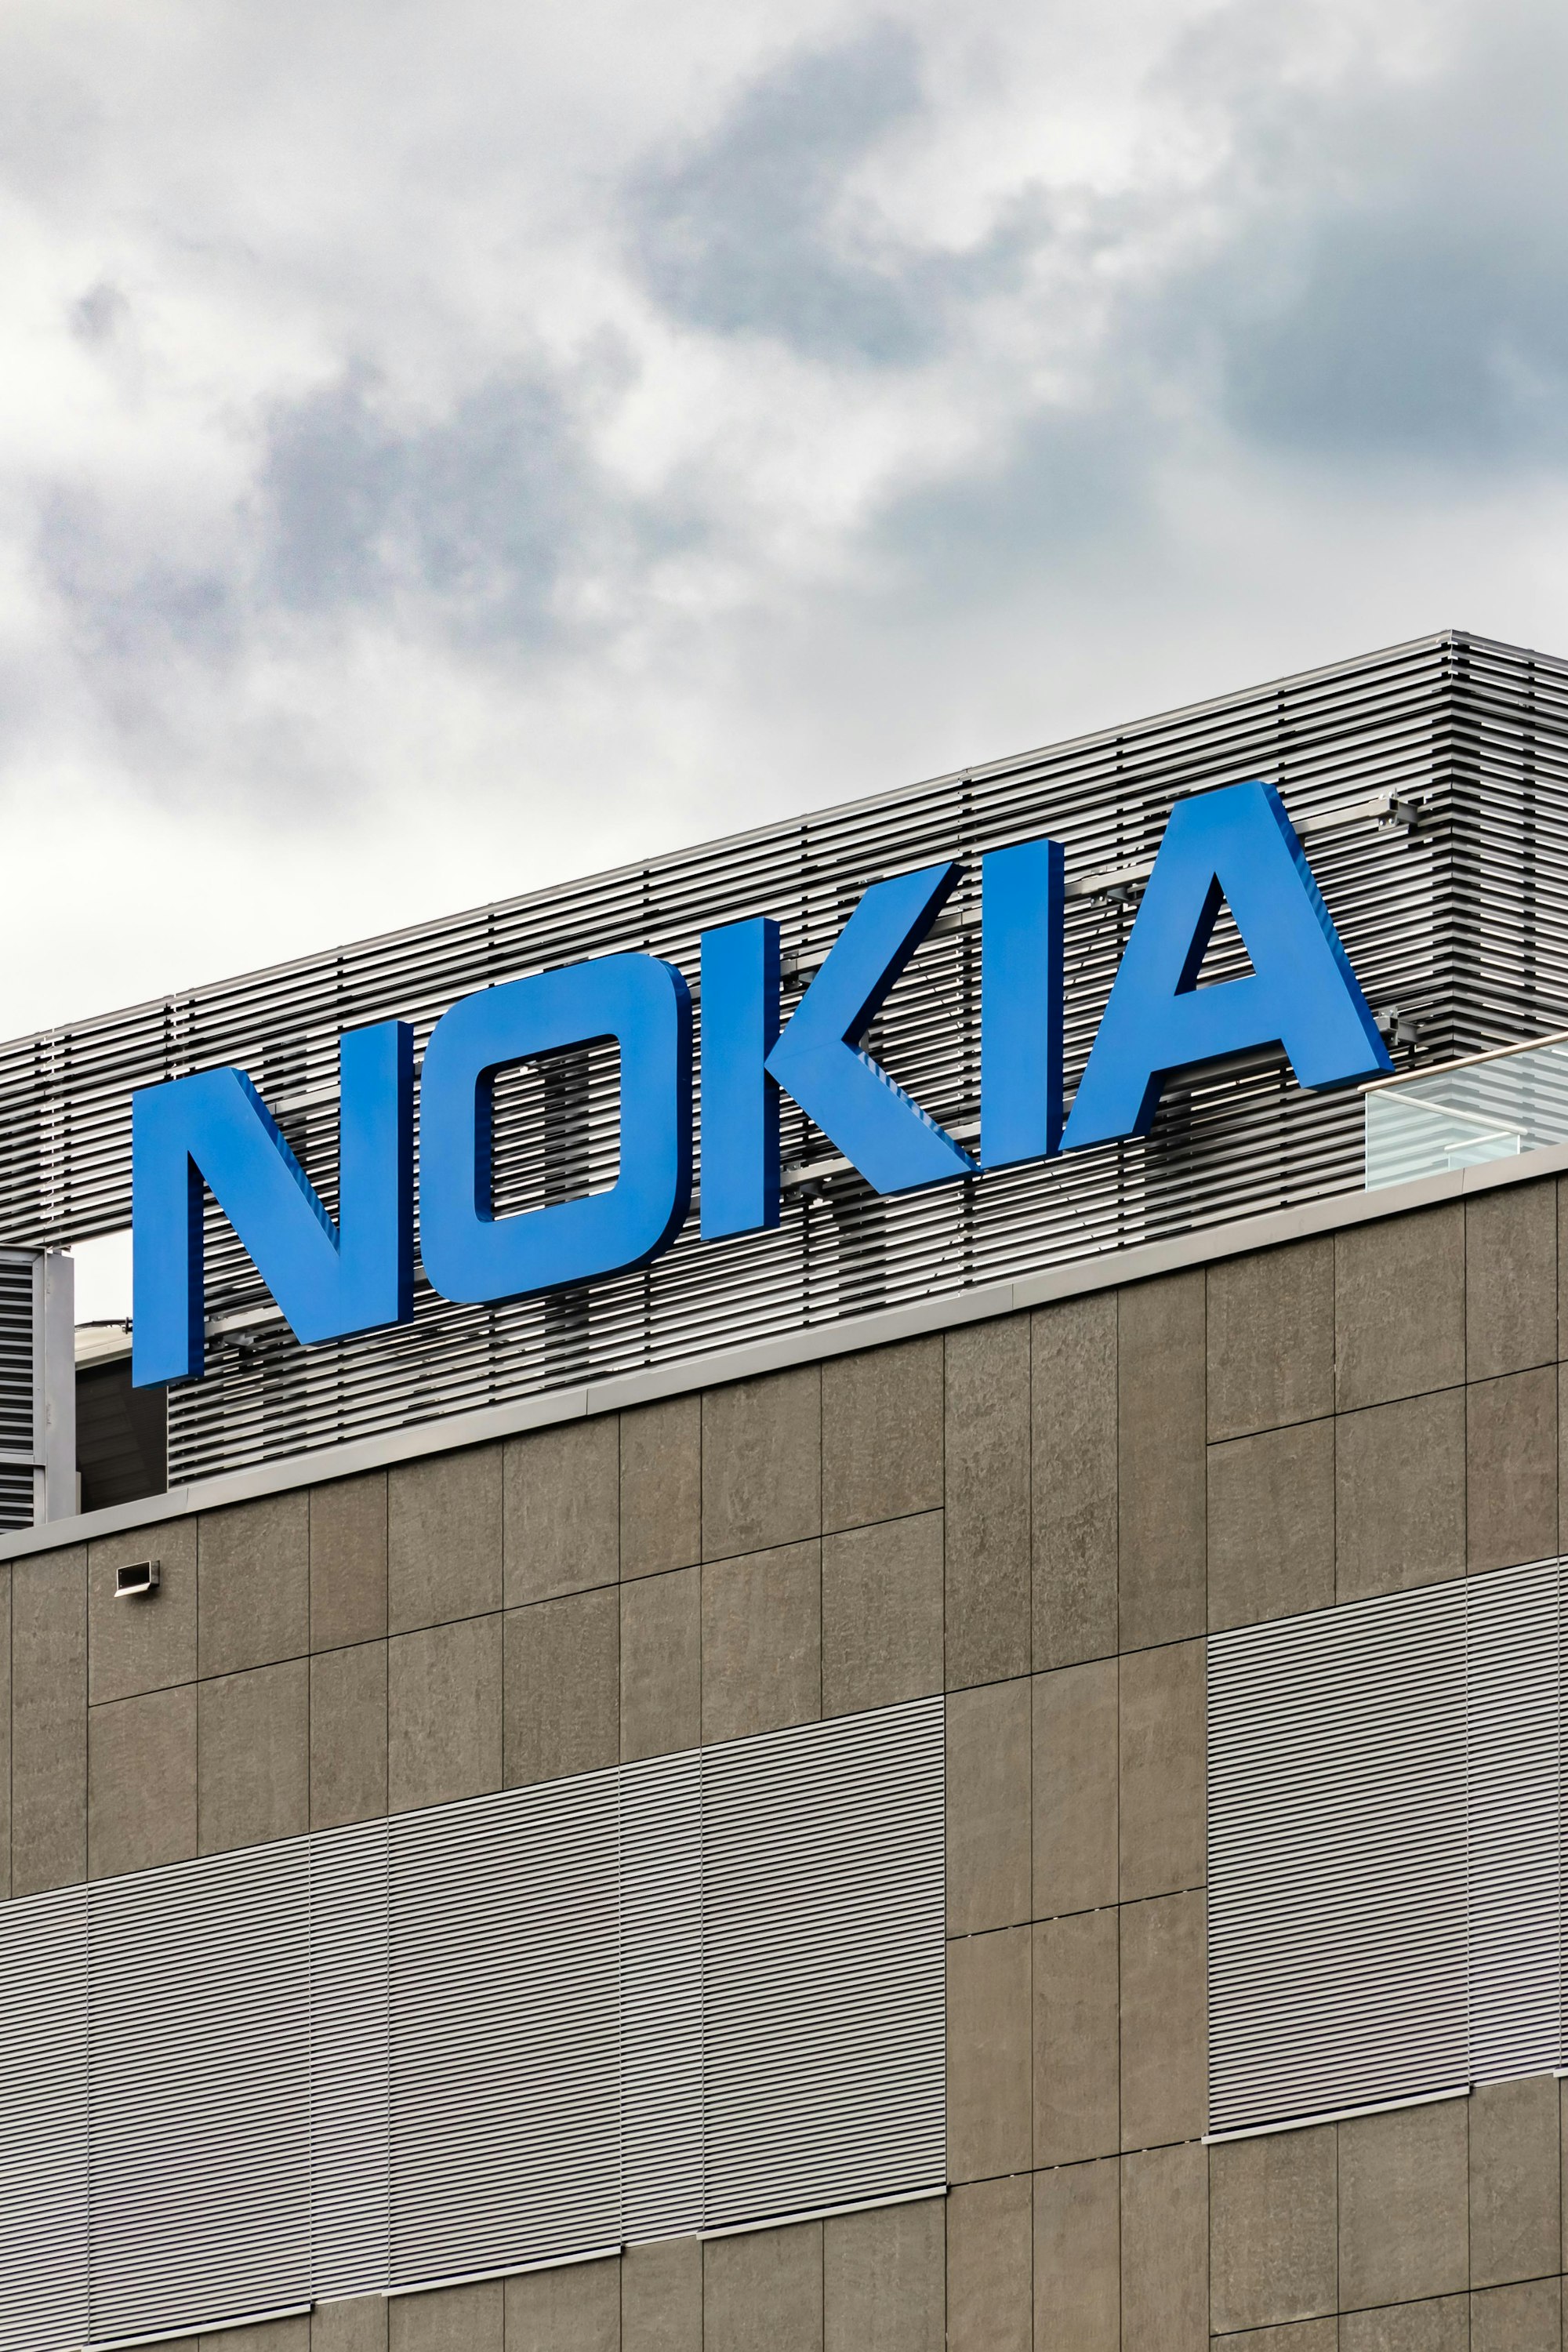 Checkmate, Nokia outwits Microsoft in the long game